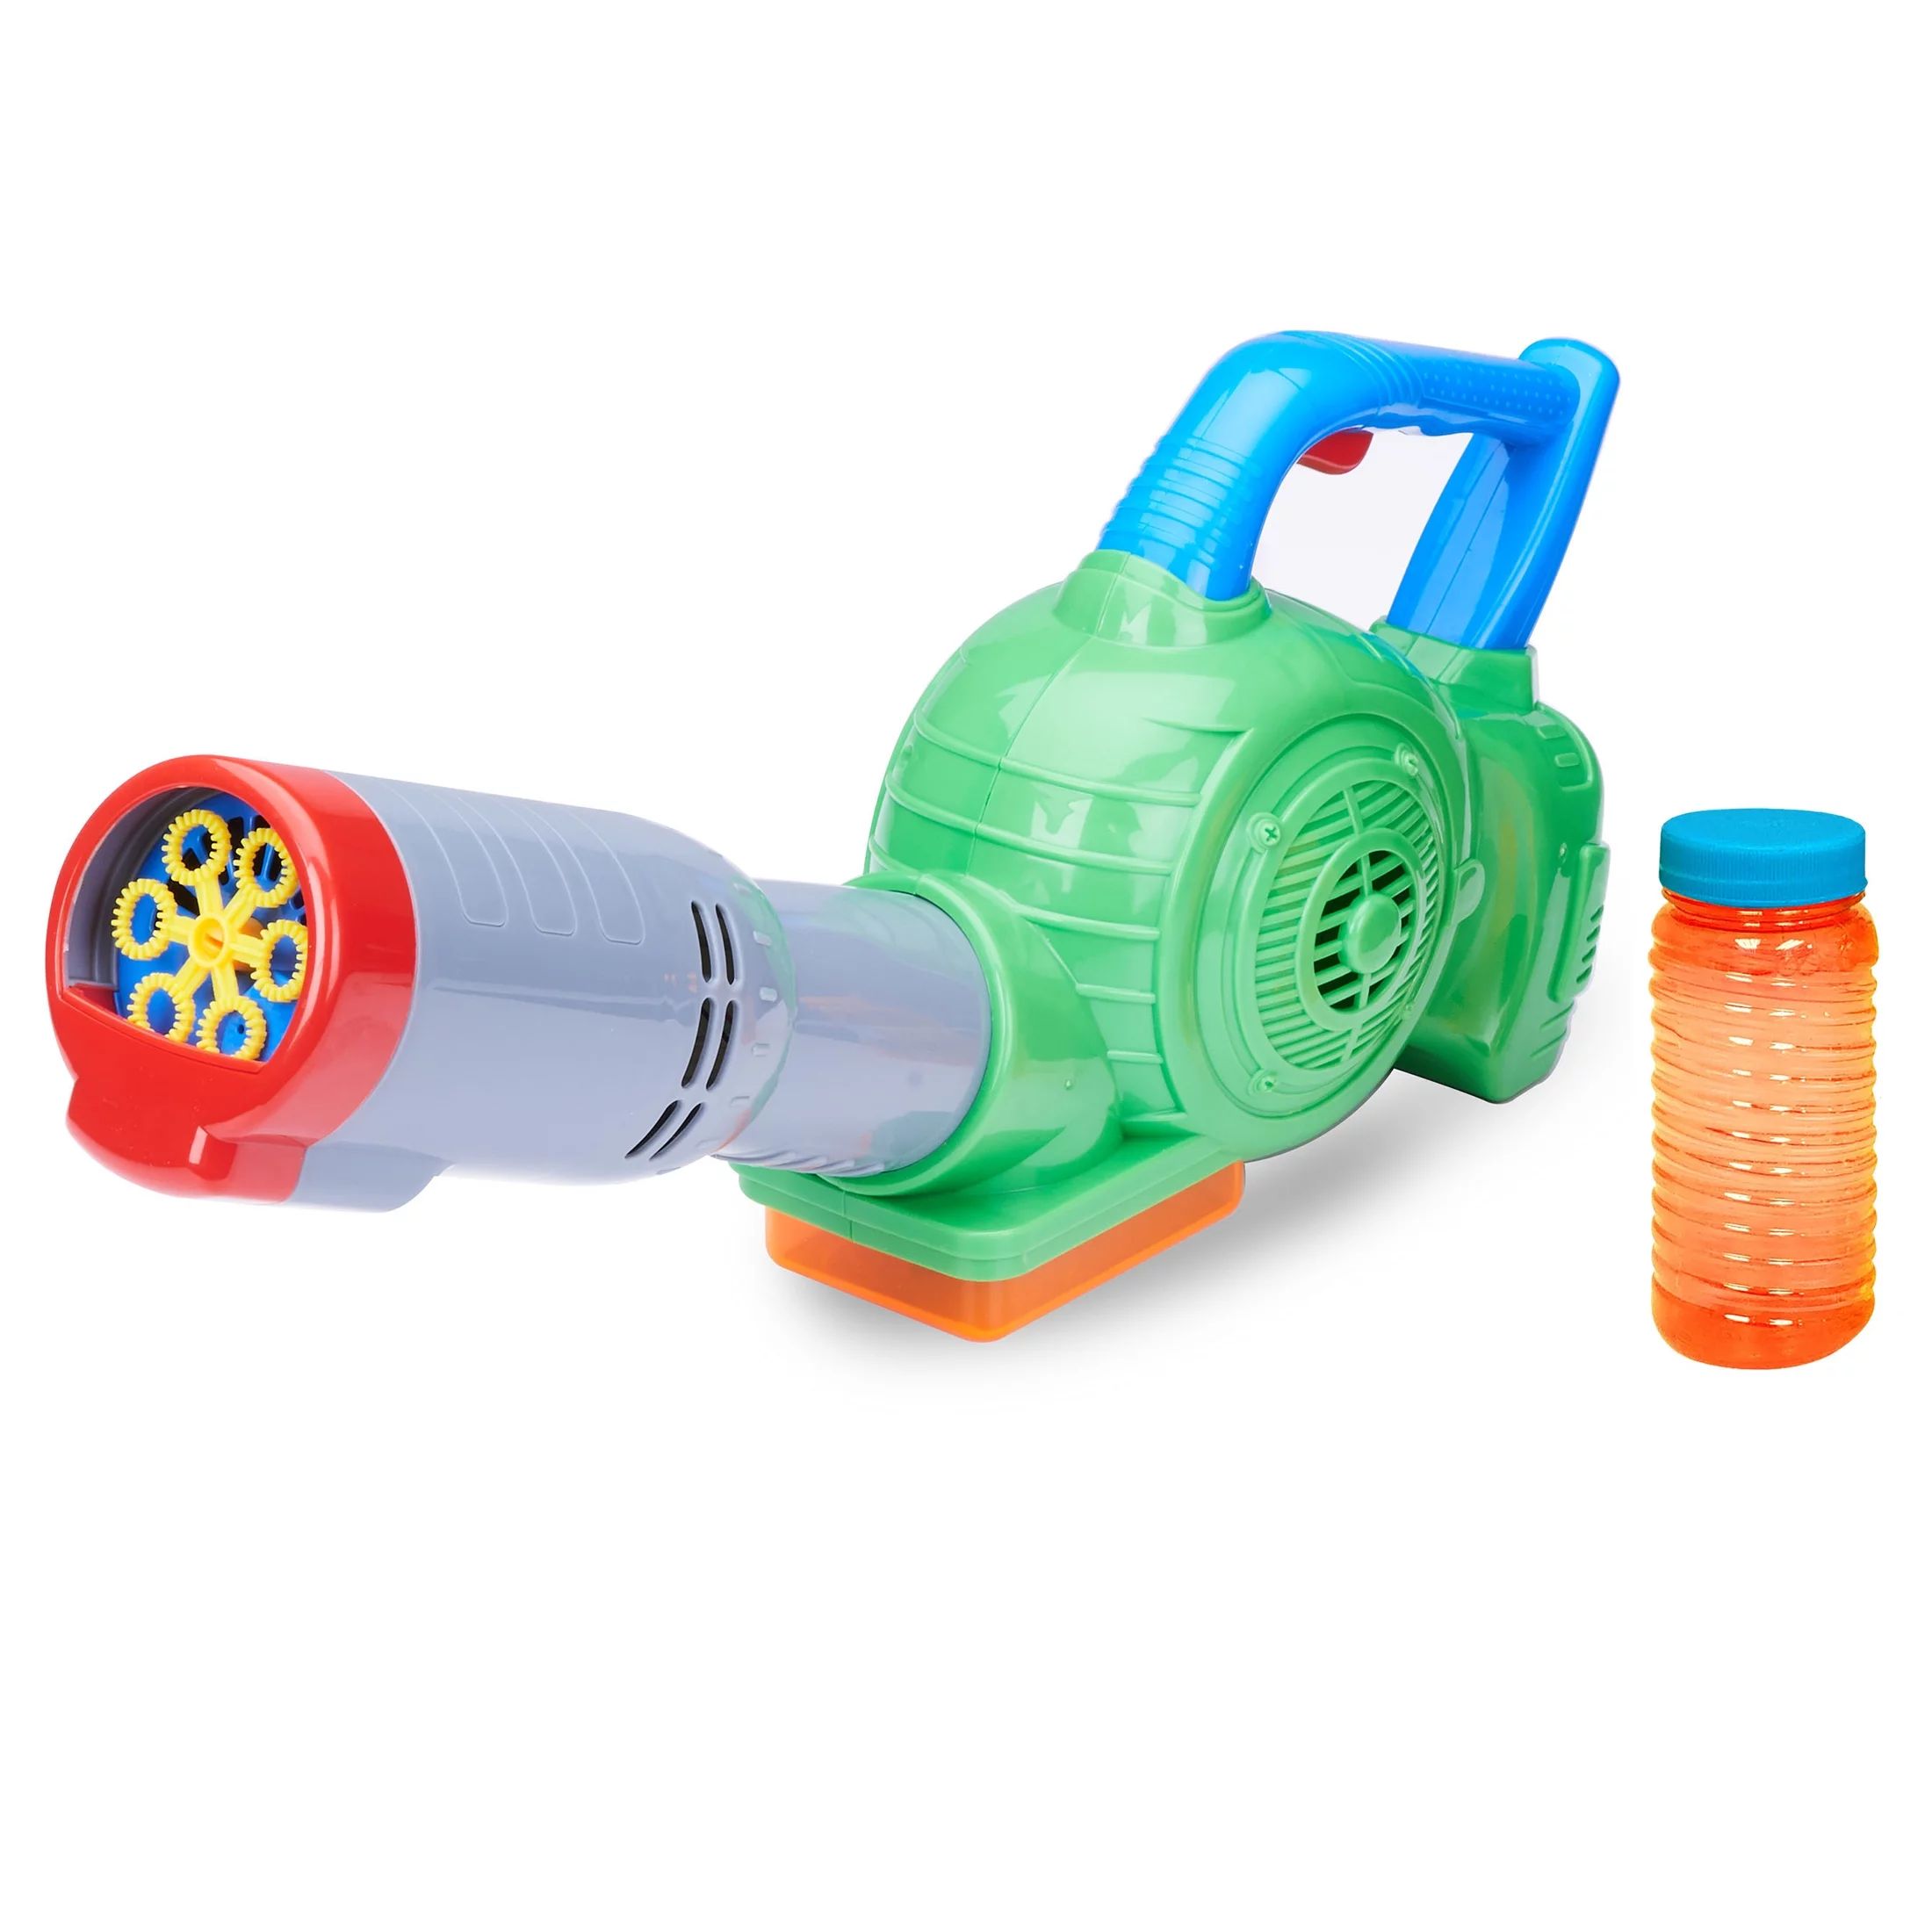 Play Day Bubble Leaf Blower, Battery Operated, Bubble Blowing Toy, For ages 3+ | Walmart (US)